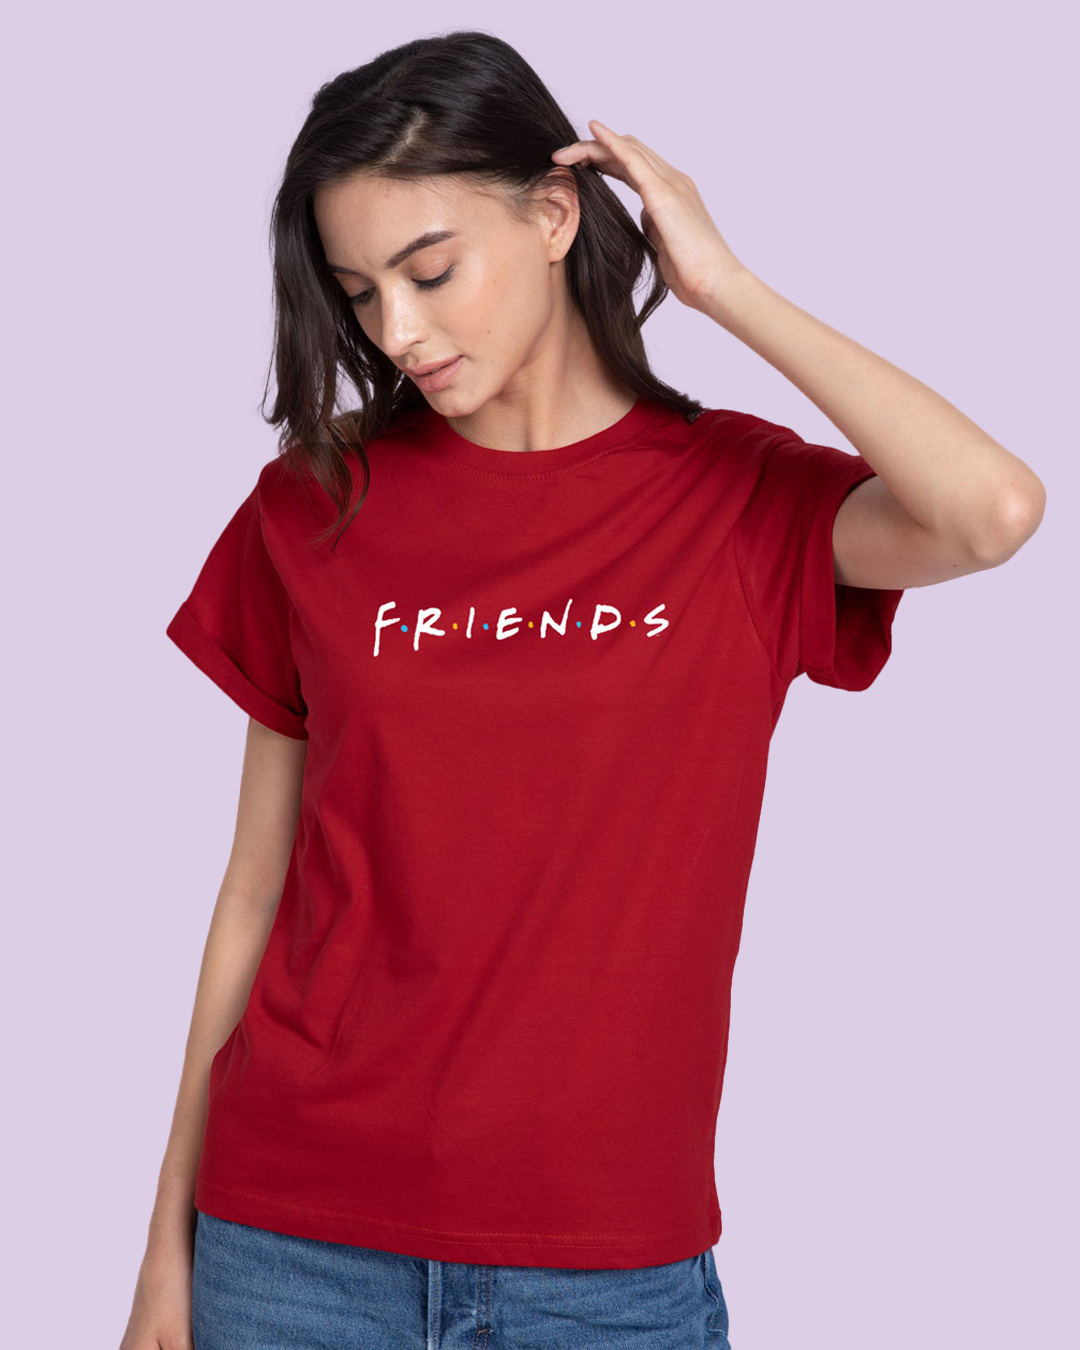 Red T-shirt